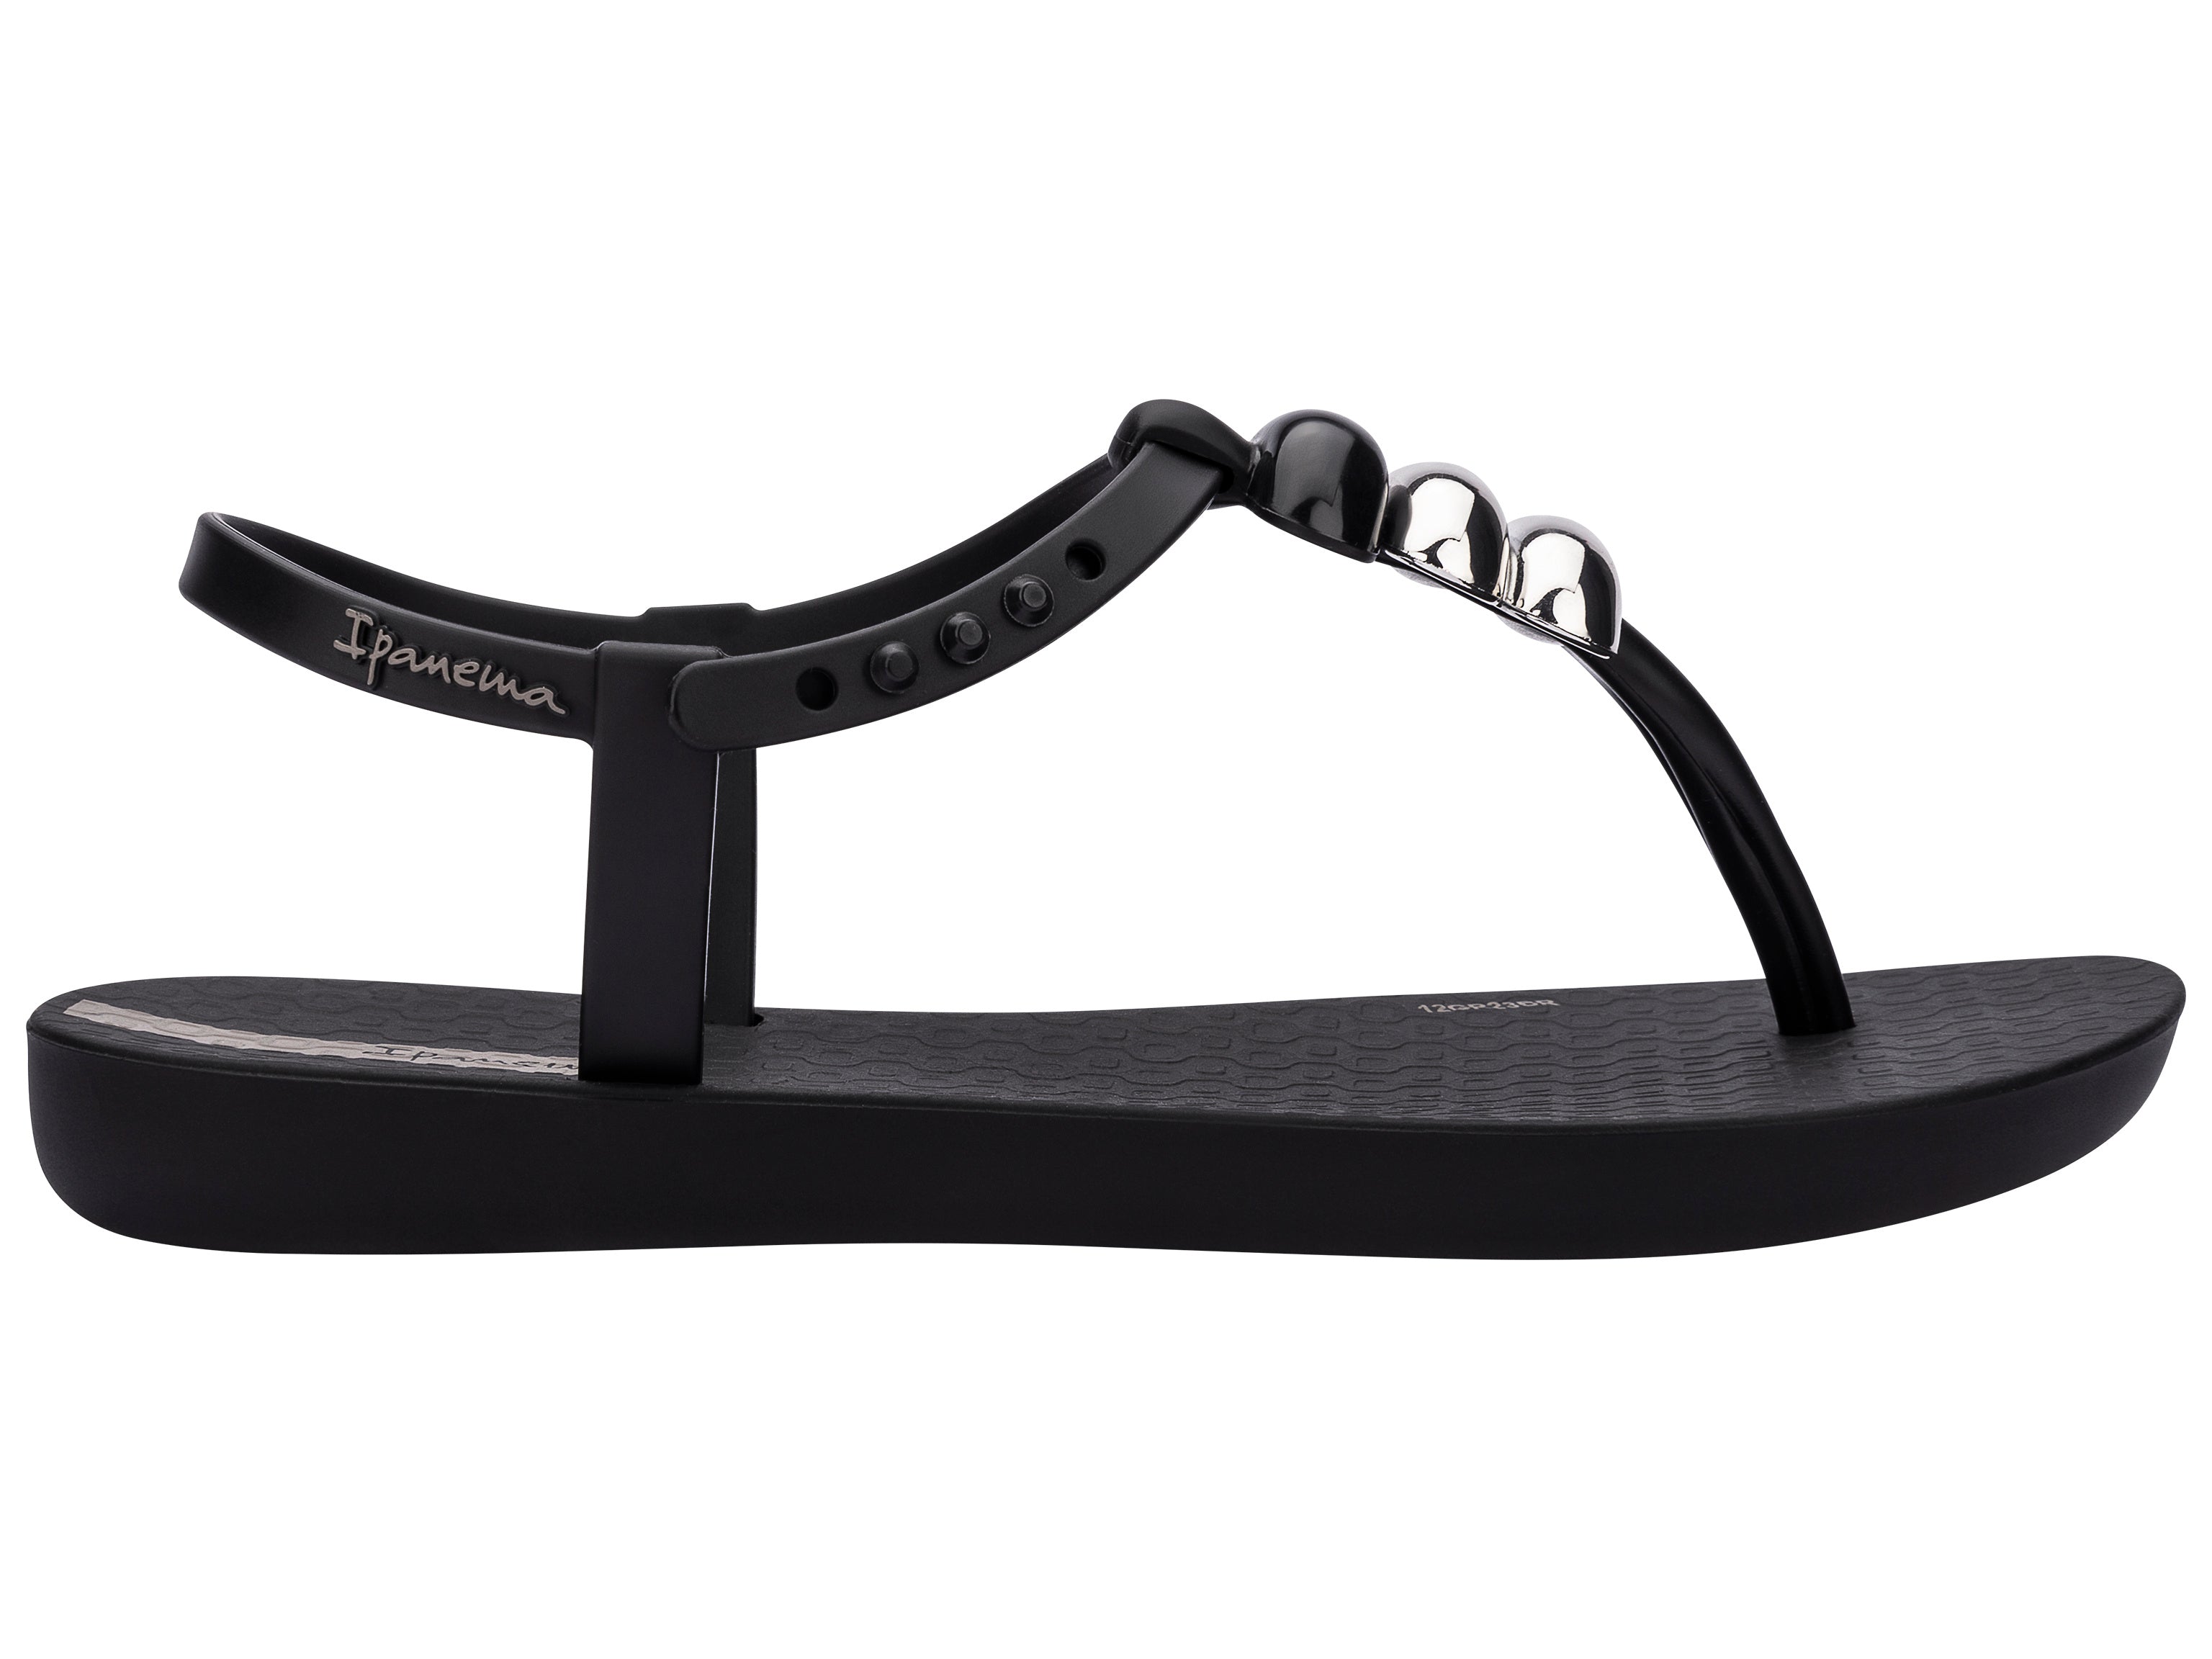 Outer side view of a black Ipanema Class kids' t-strap sandal with 3 baubles on the strap.